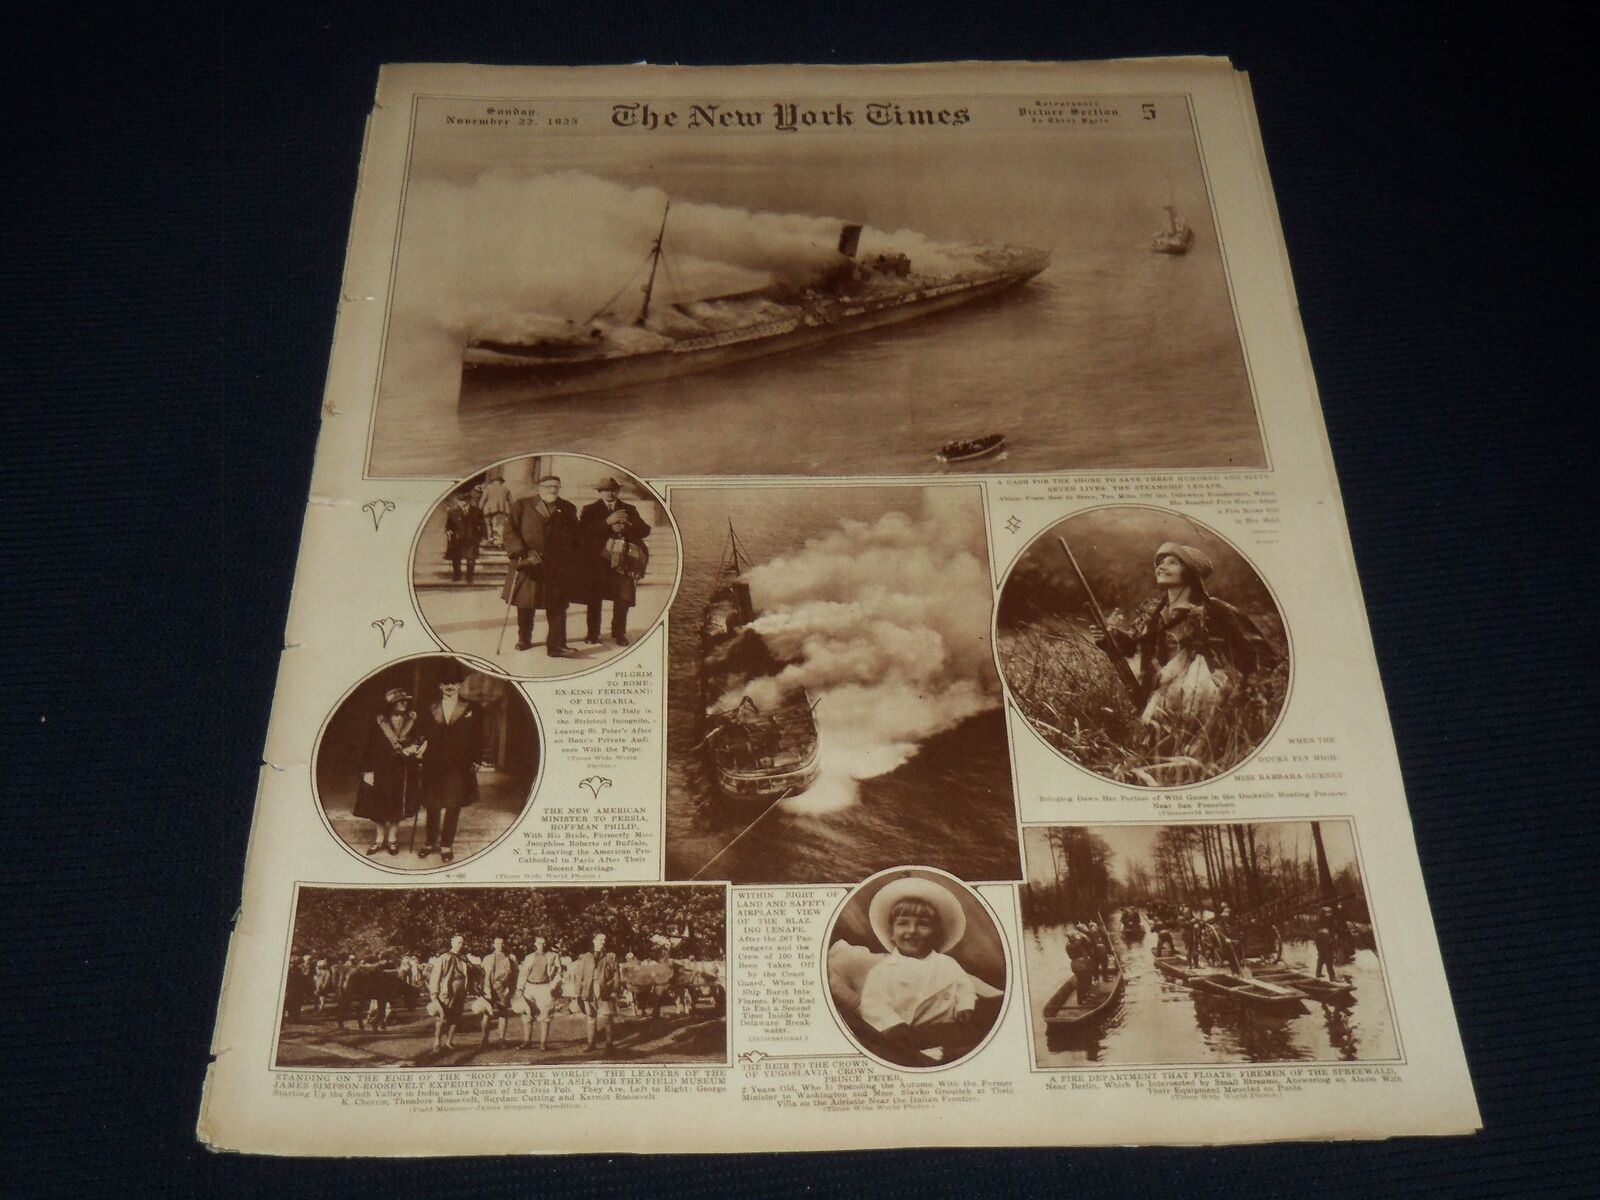 1925 NOVEMBER 22 NEW YORK TIMES PICTURE SECTION - STEAMSHIP LENAPE - NT 9495